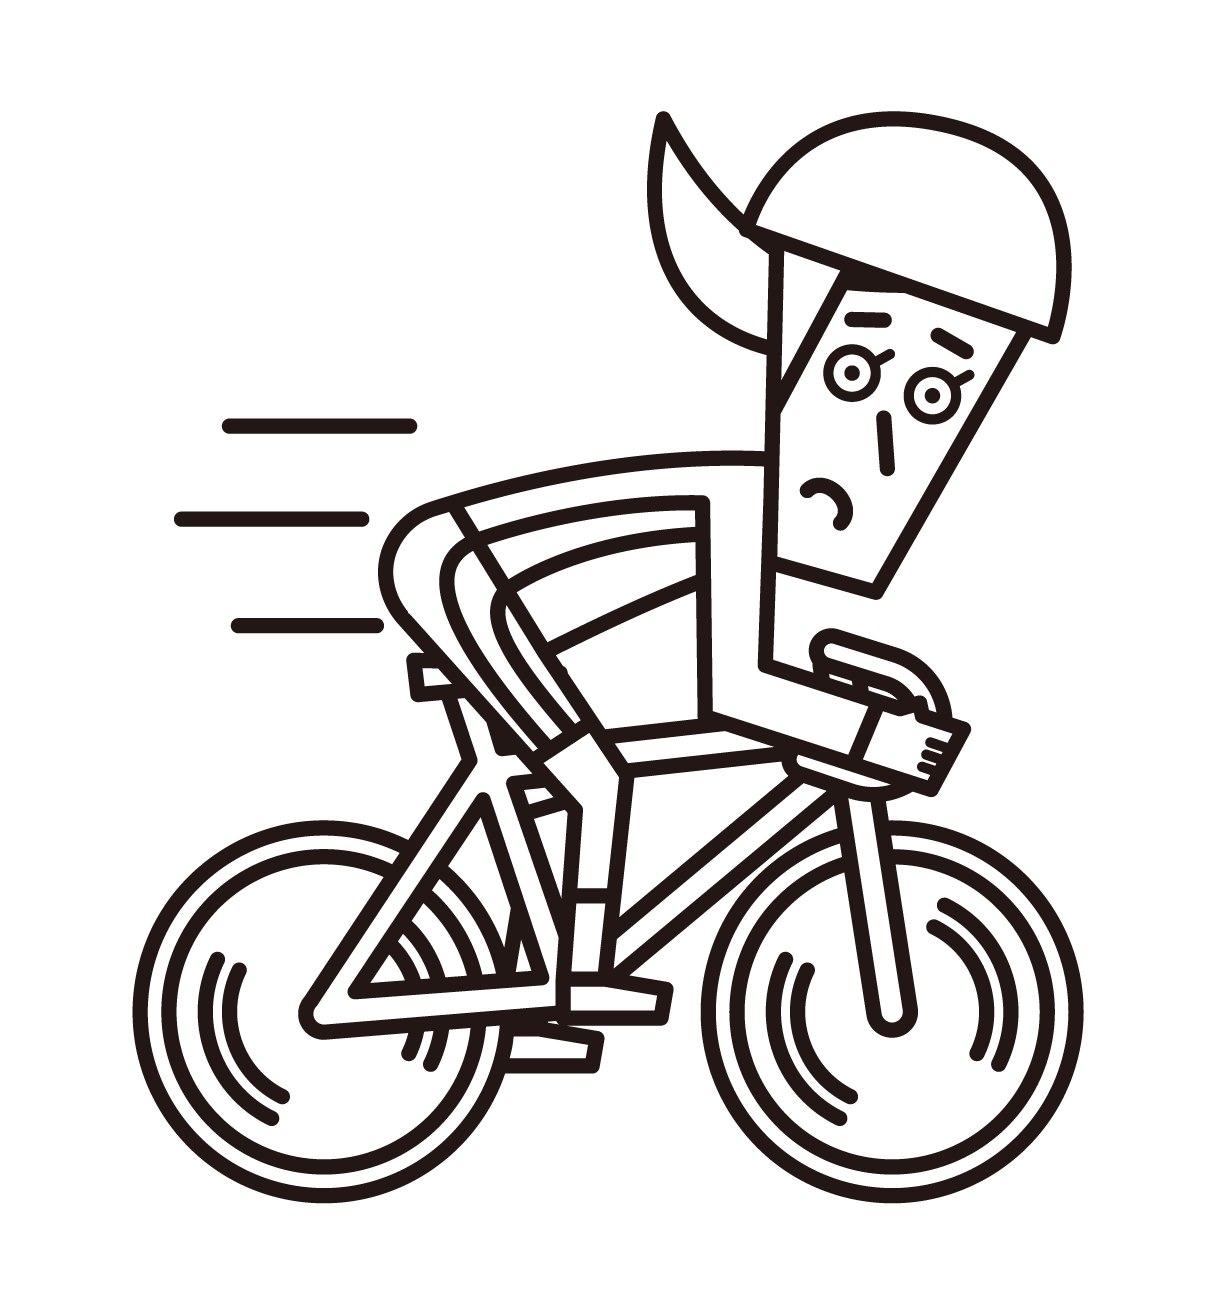 Illustration of a female bicycle racer